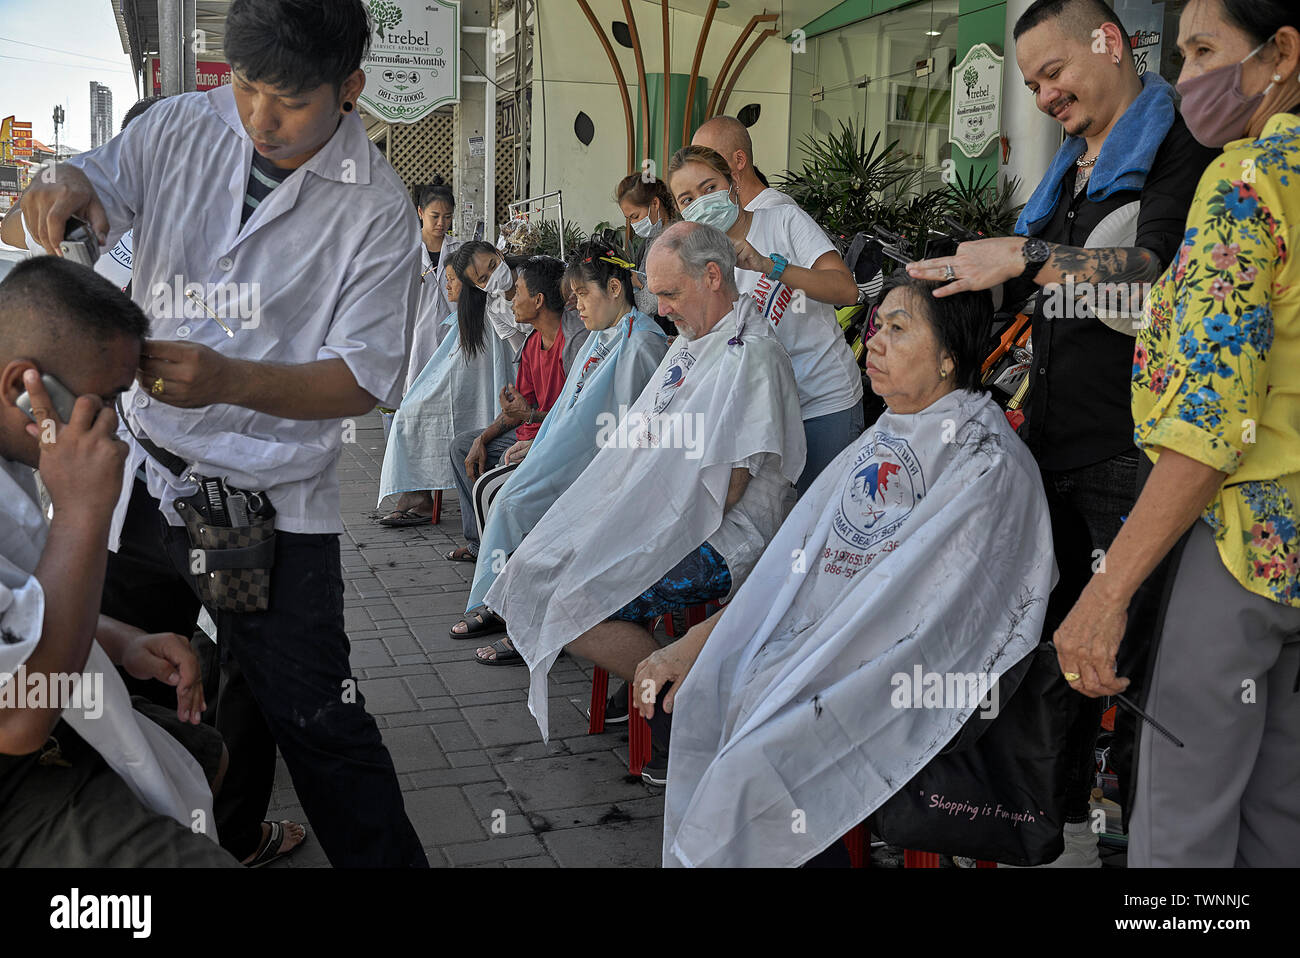 Street haircut. Business promotion of a local Thailand hair salon with people getting a free haircut Stock Photo